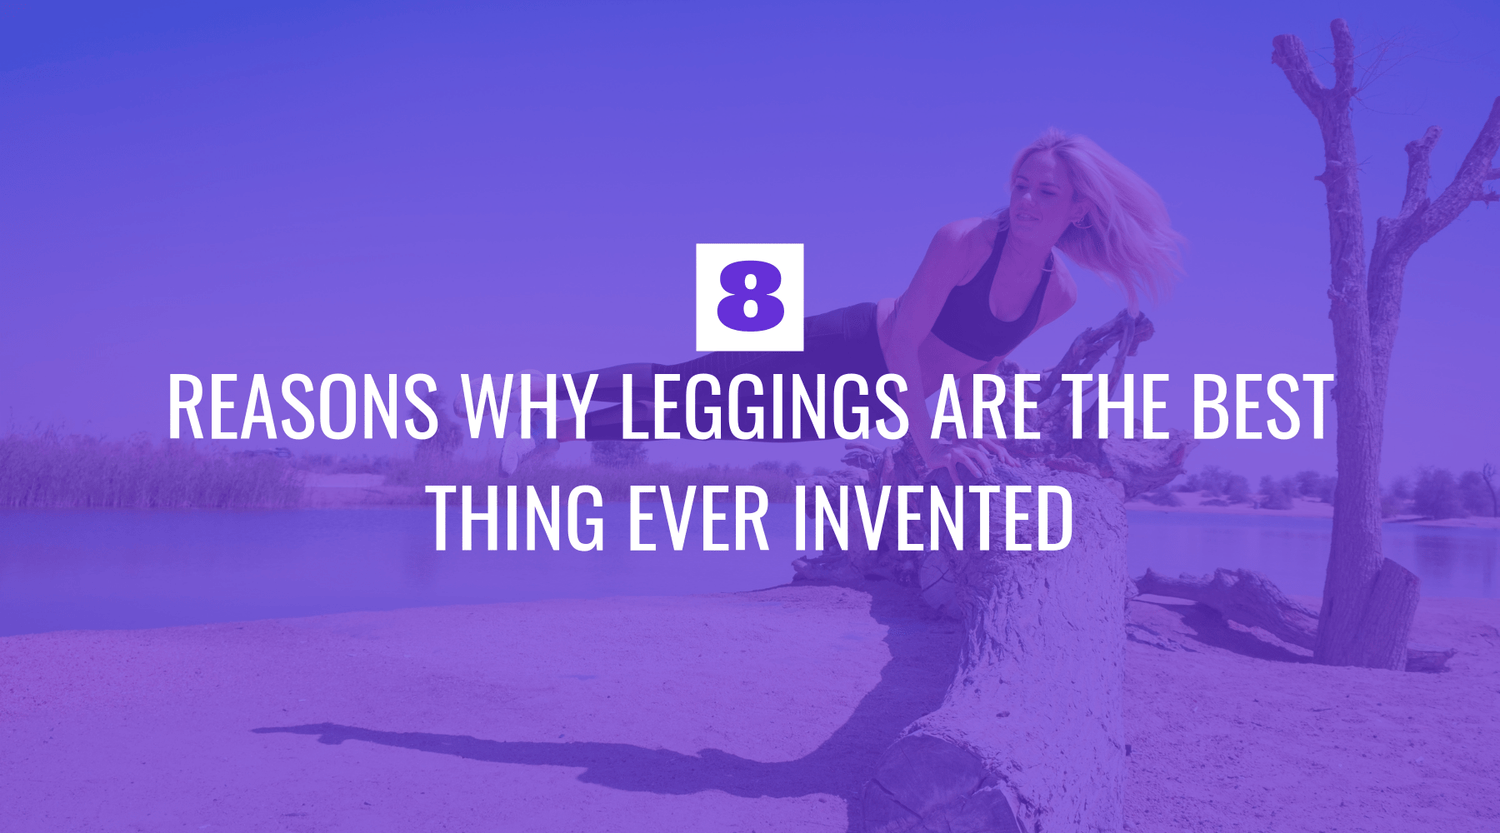 Eight Reasons Why Leggings Are the Best Thing Ever Invented